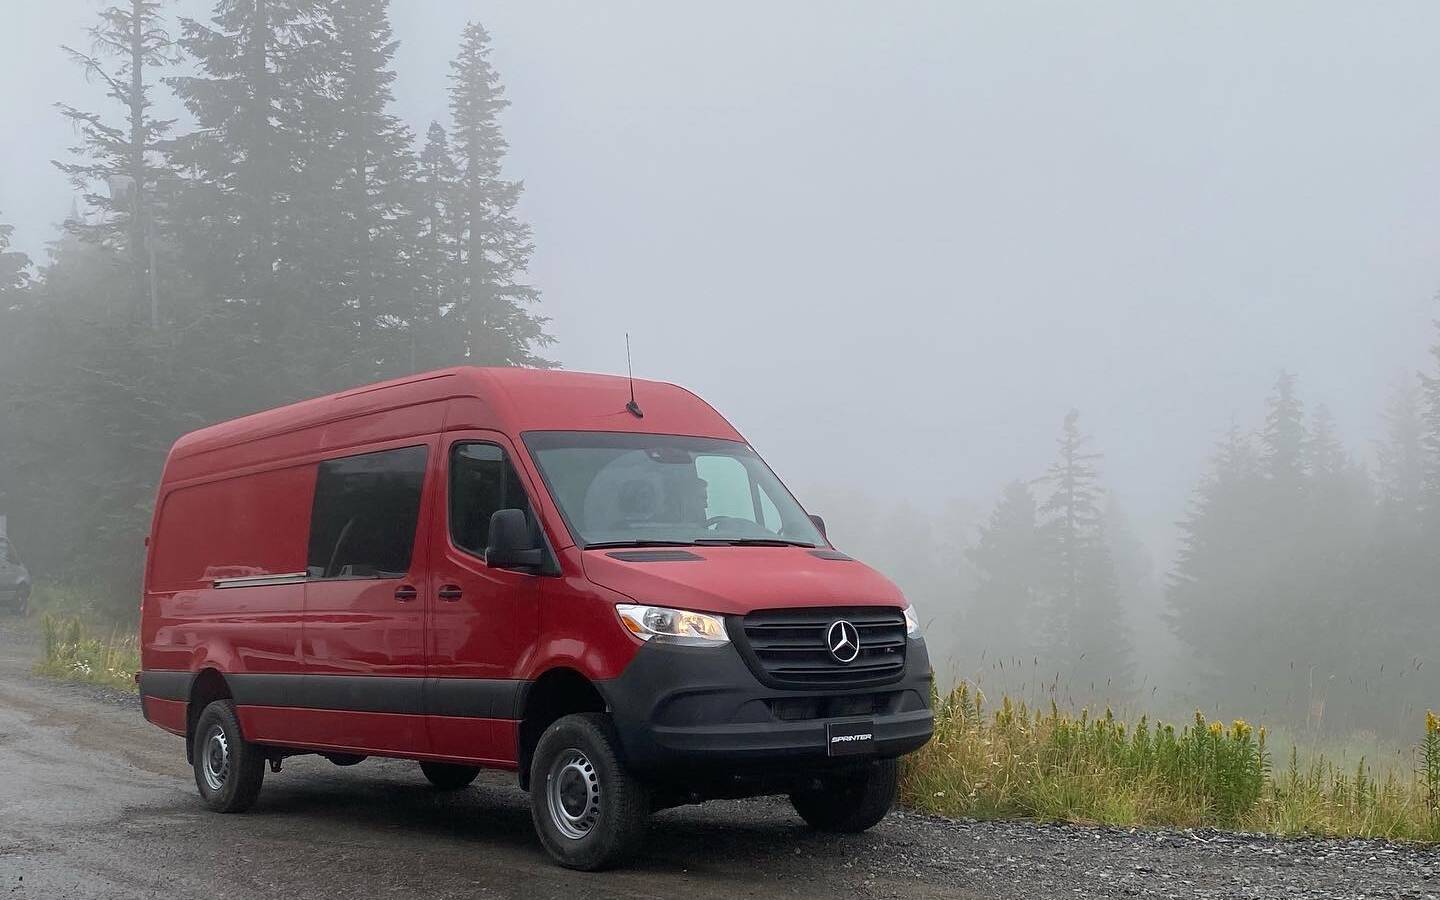 https://i.gaw.to/content/photos/54/60/546041-2023-mercedes-benz-sprinter-vanlife-elevated.jpeg?1024x640